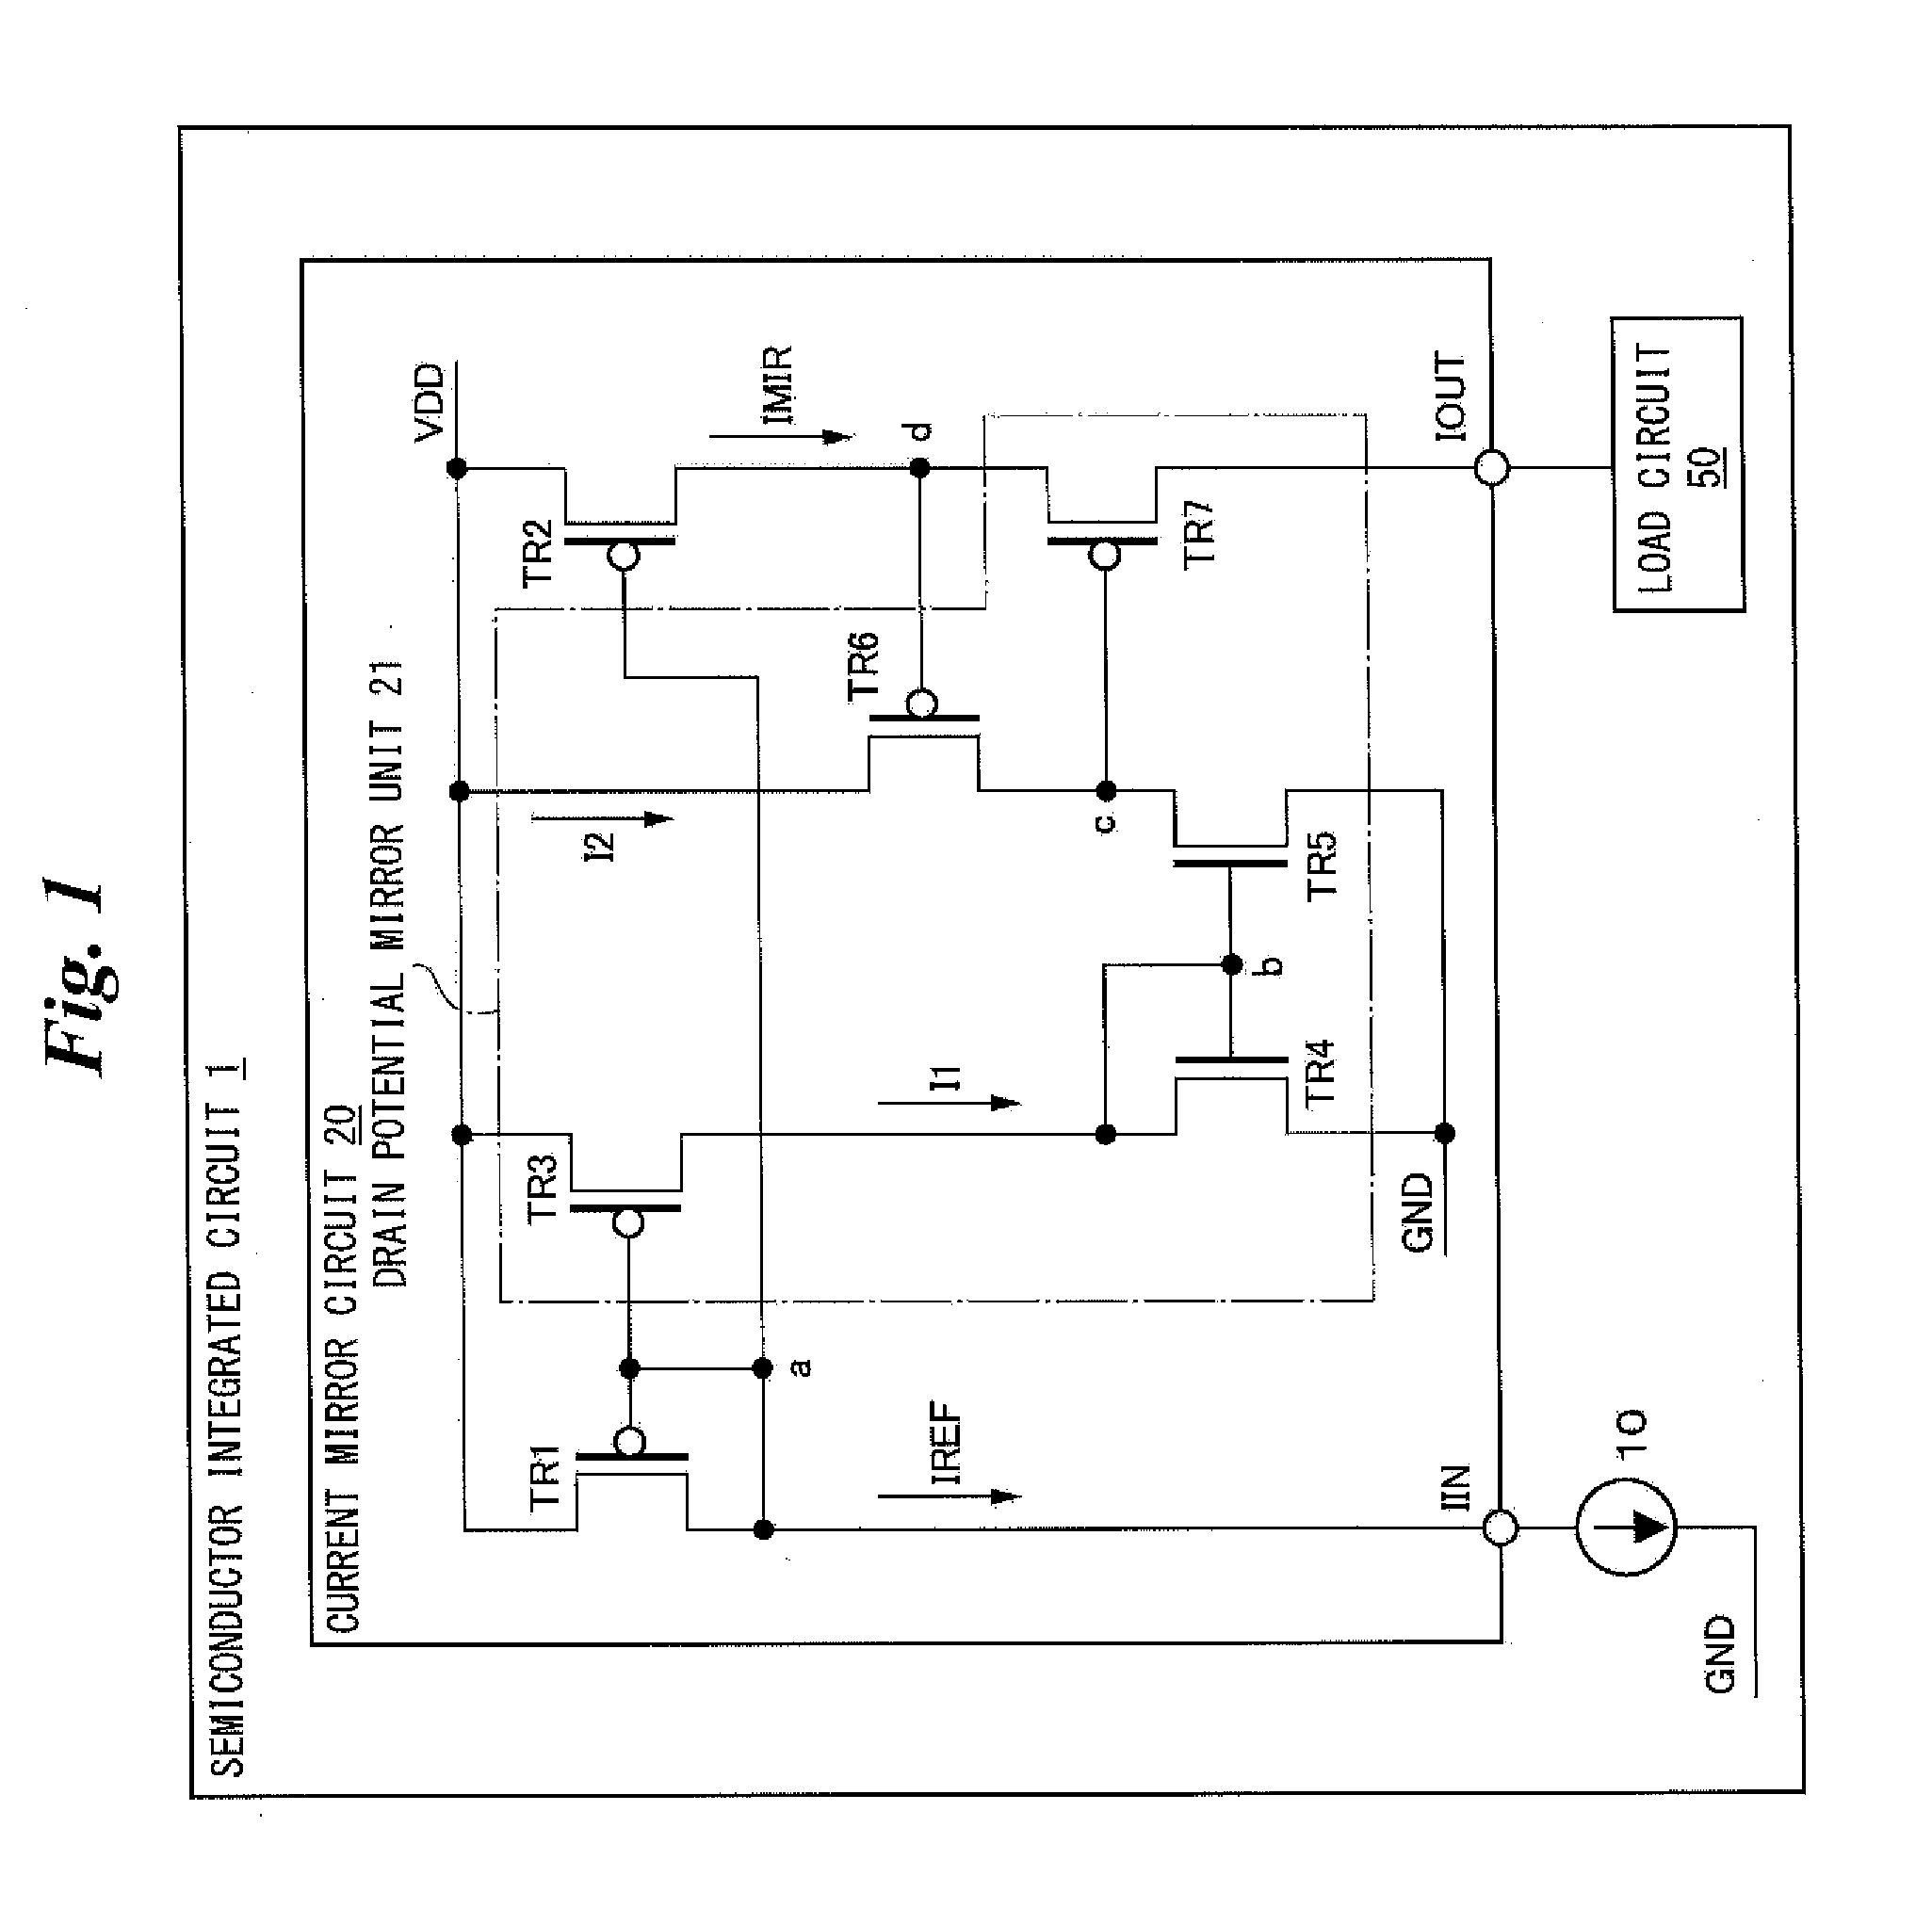 Current mirror circuit and receiver using the same